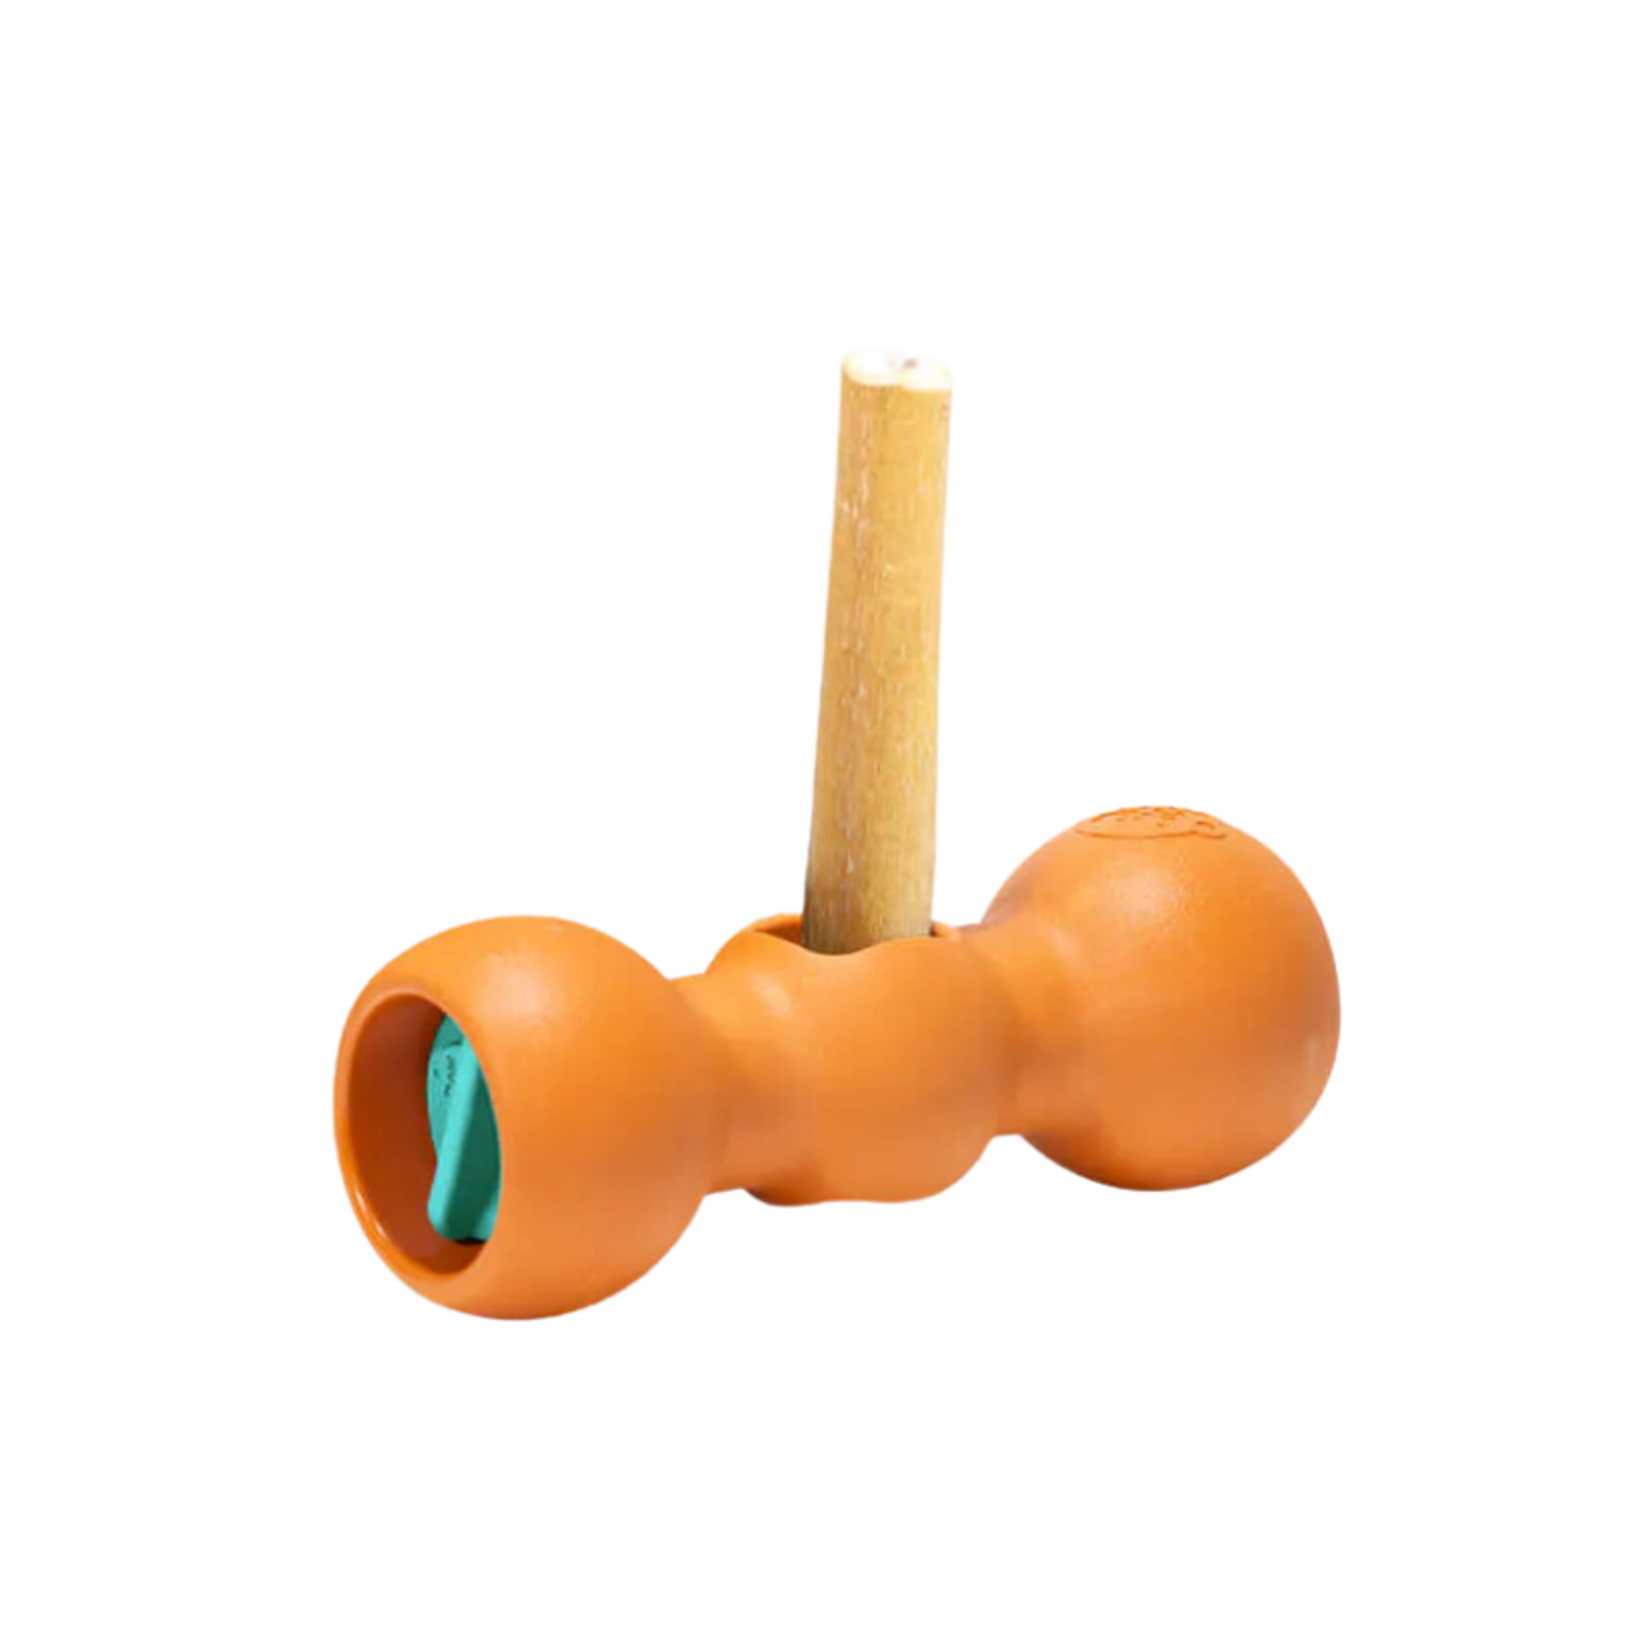 Bow Wow Labs Bow Wow Buddy - Bully Stick Holder - Safety Device for Dogs - Bow Wow Labs